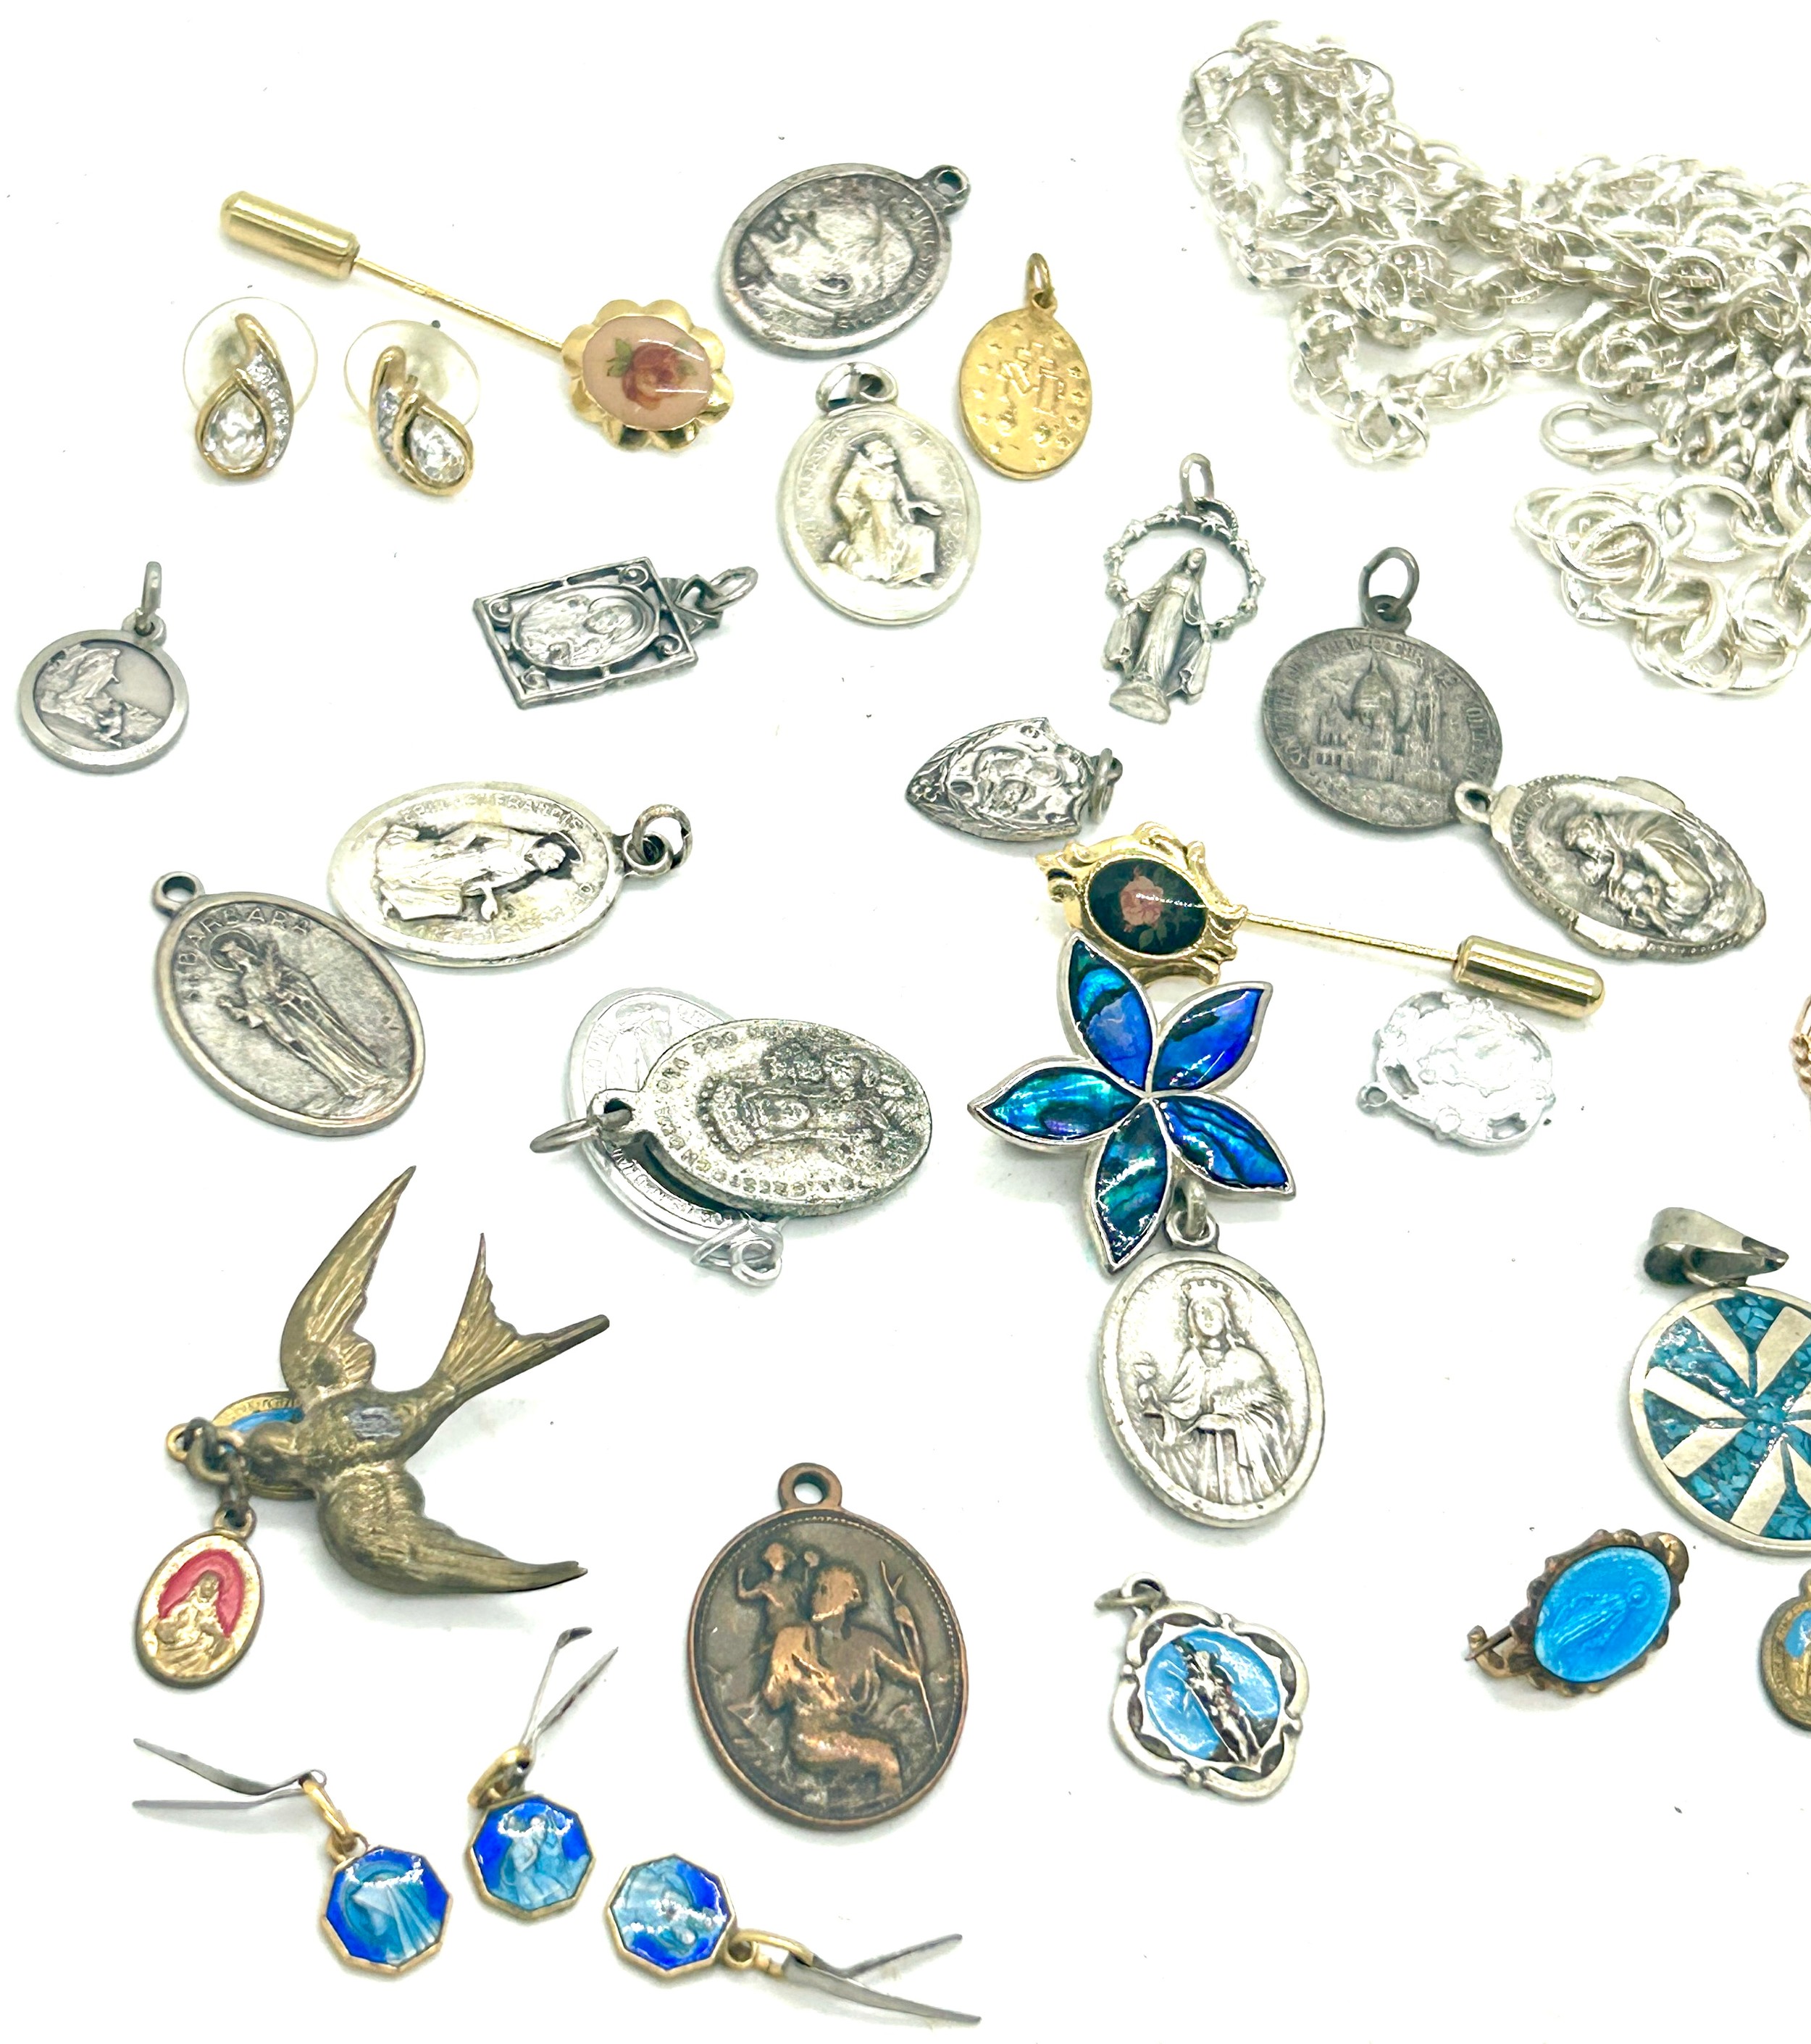 Selection of vintage ladies earrings, religious pendants, amber silver pendant, costume jewellery - Image 2 of 4